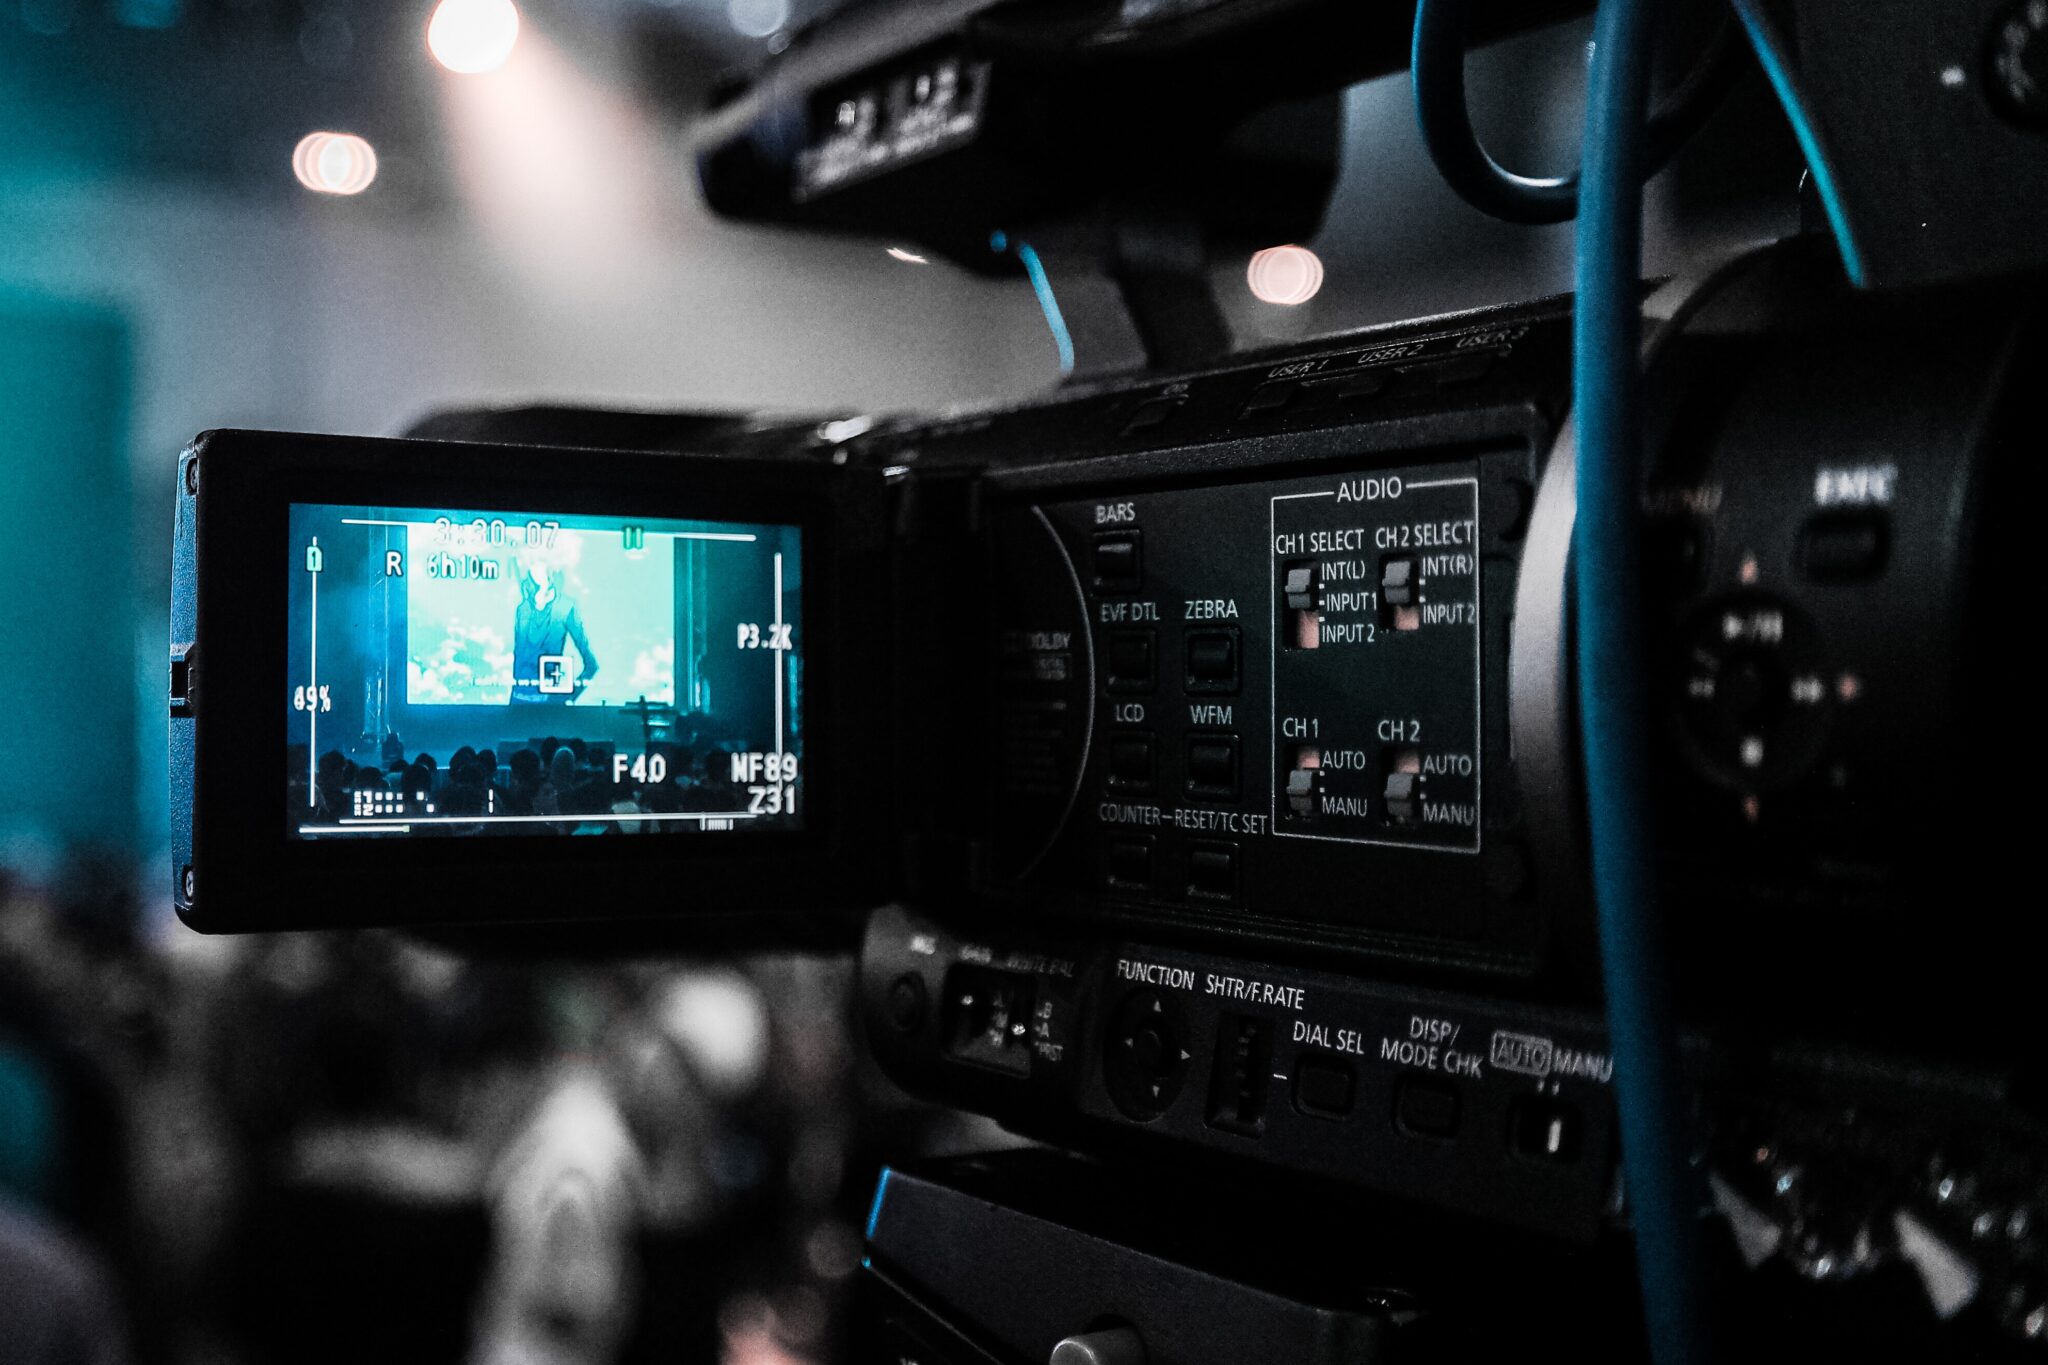 Affordable video production in Texas